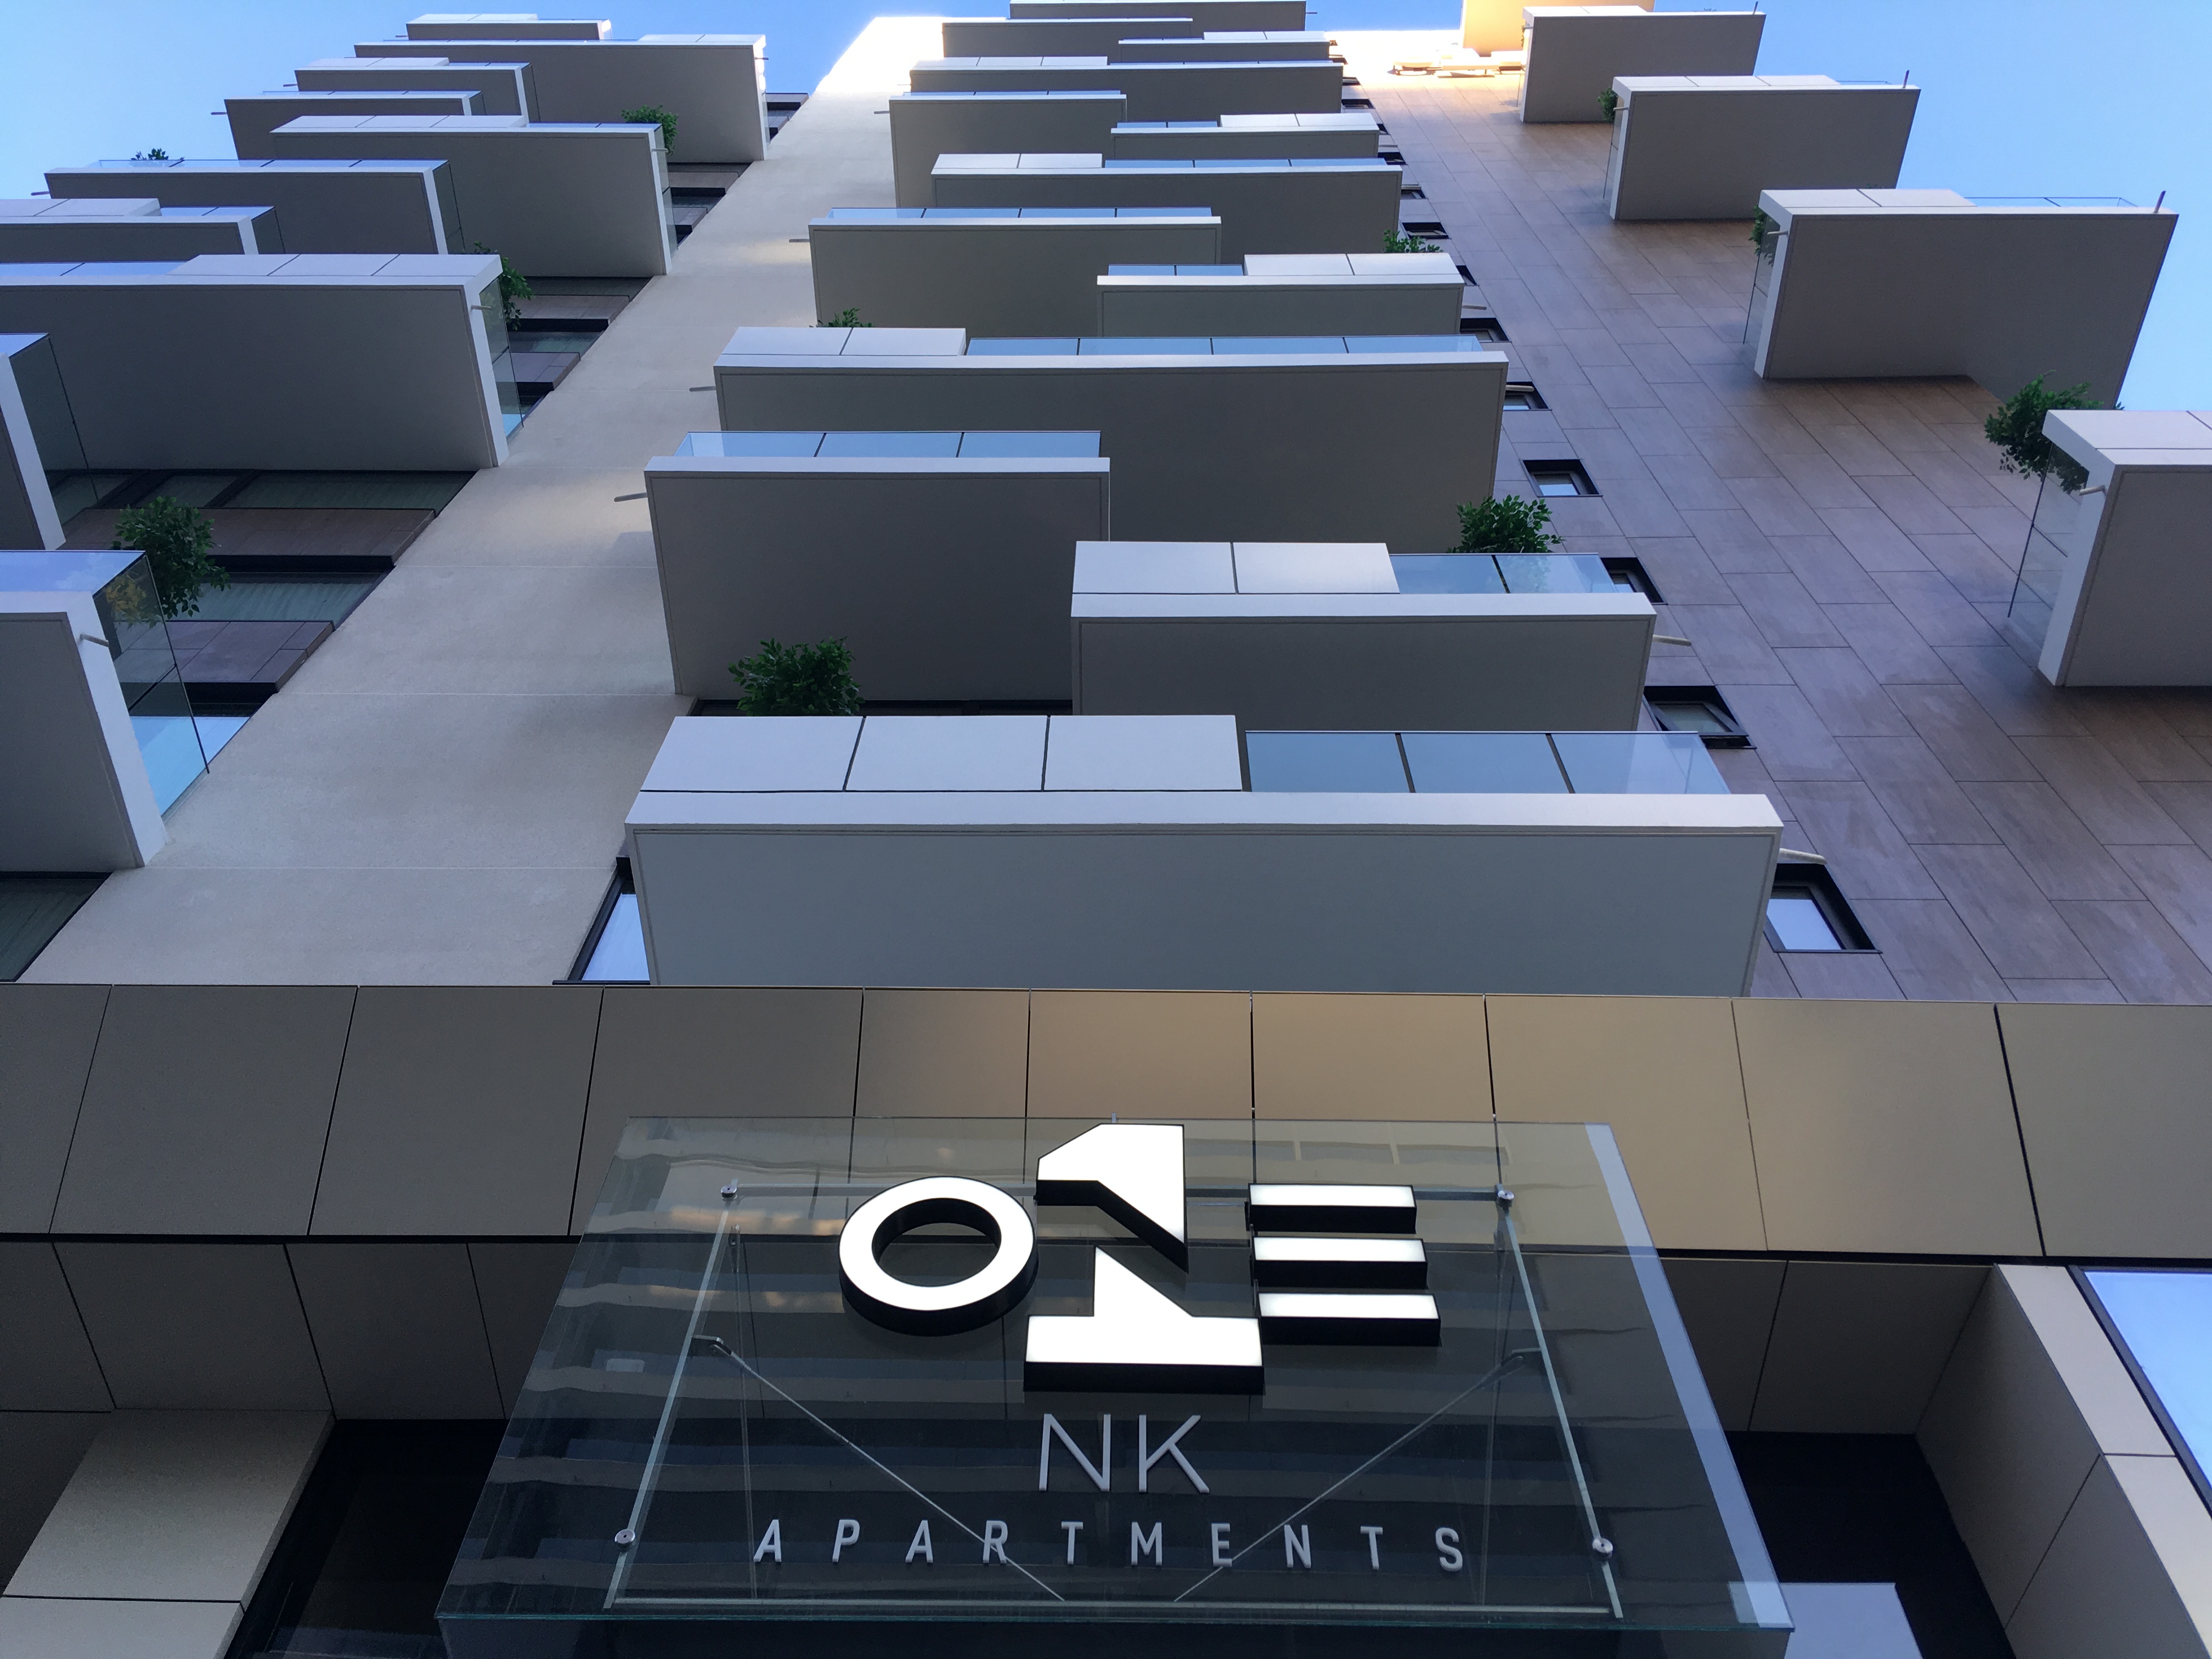 ONE NK APARTMENTS